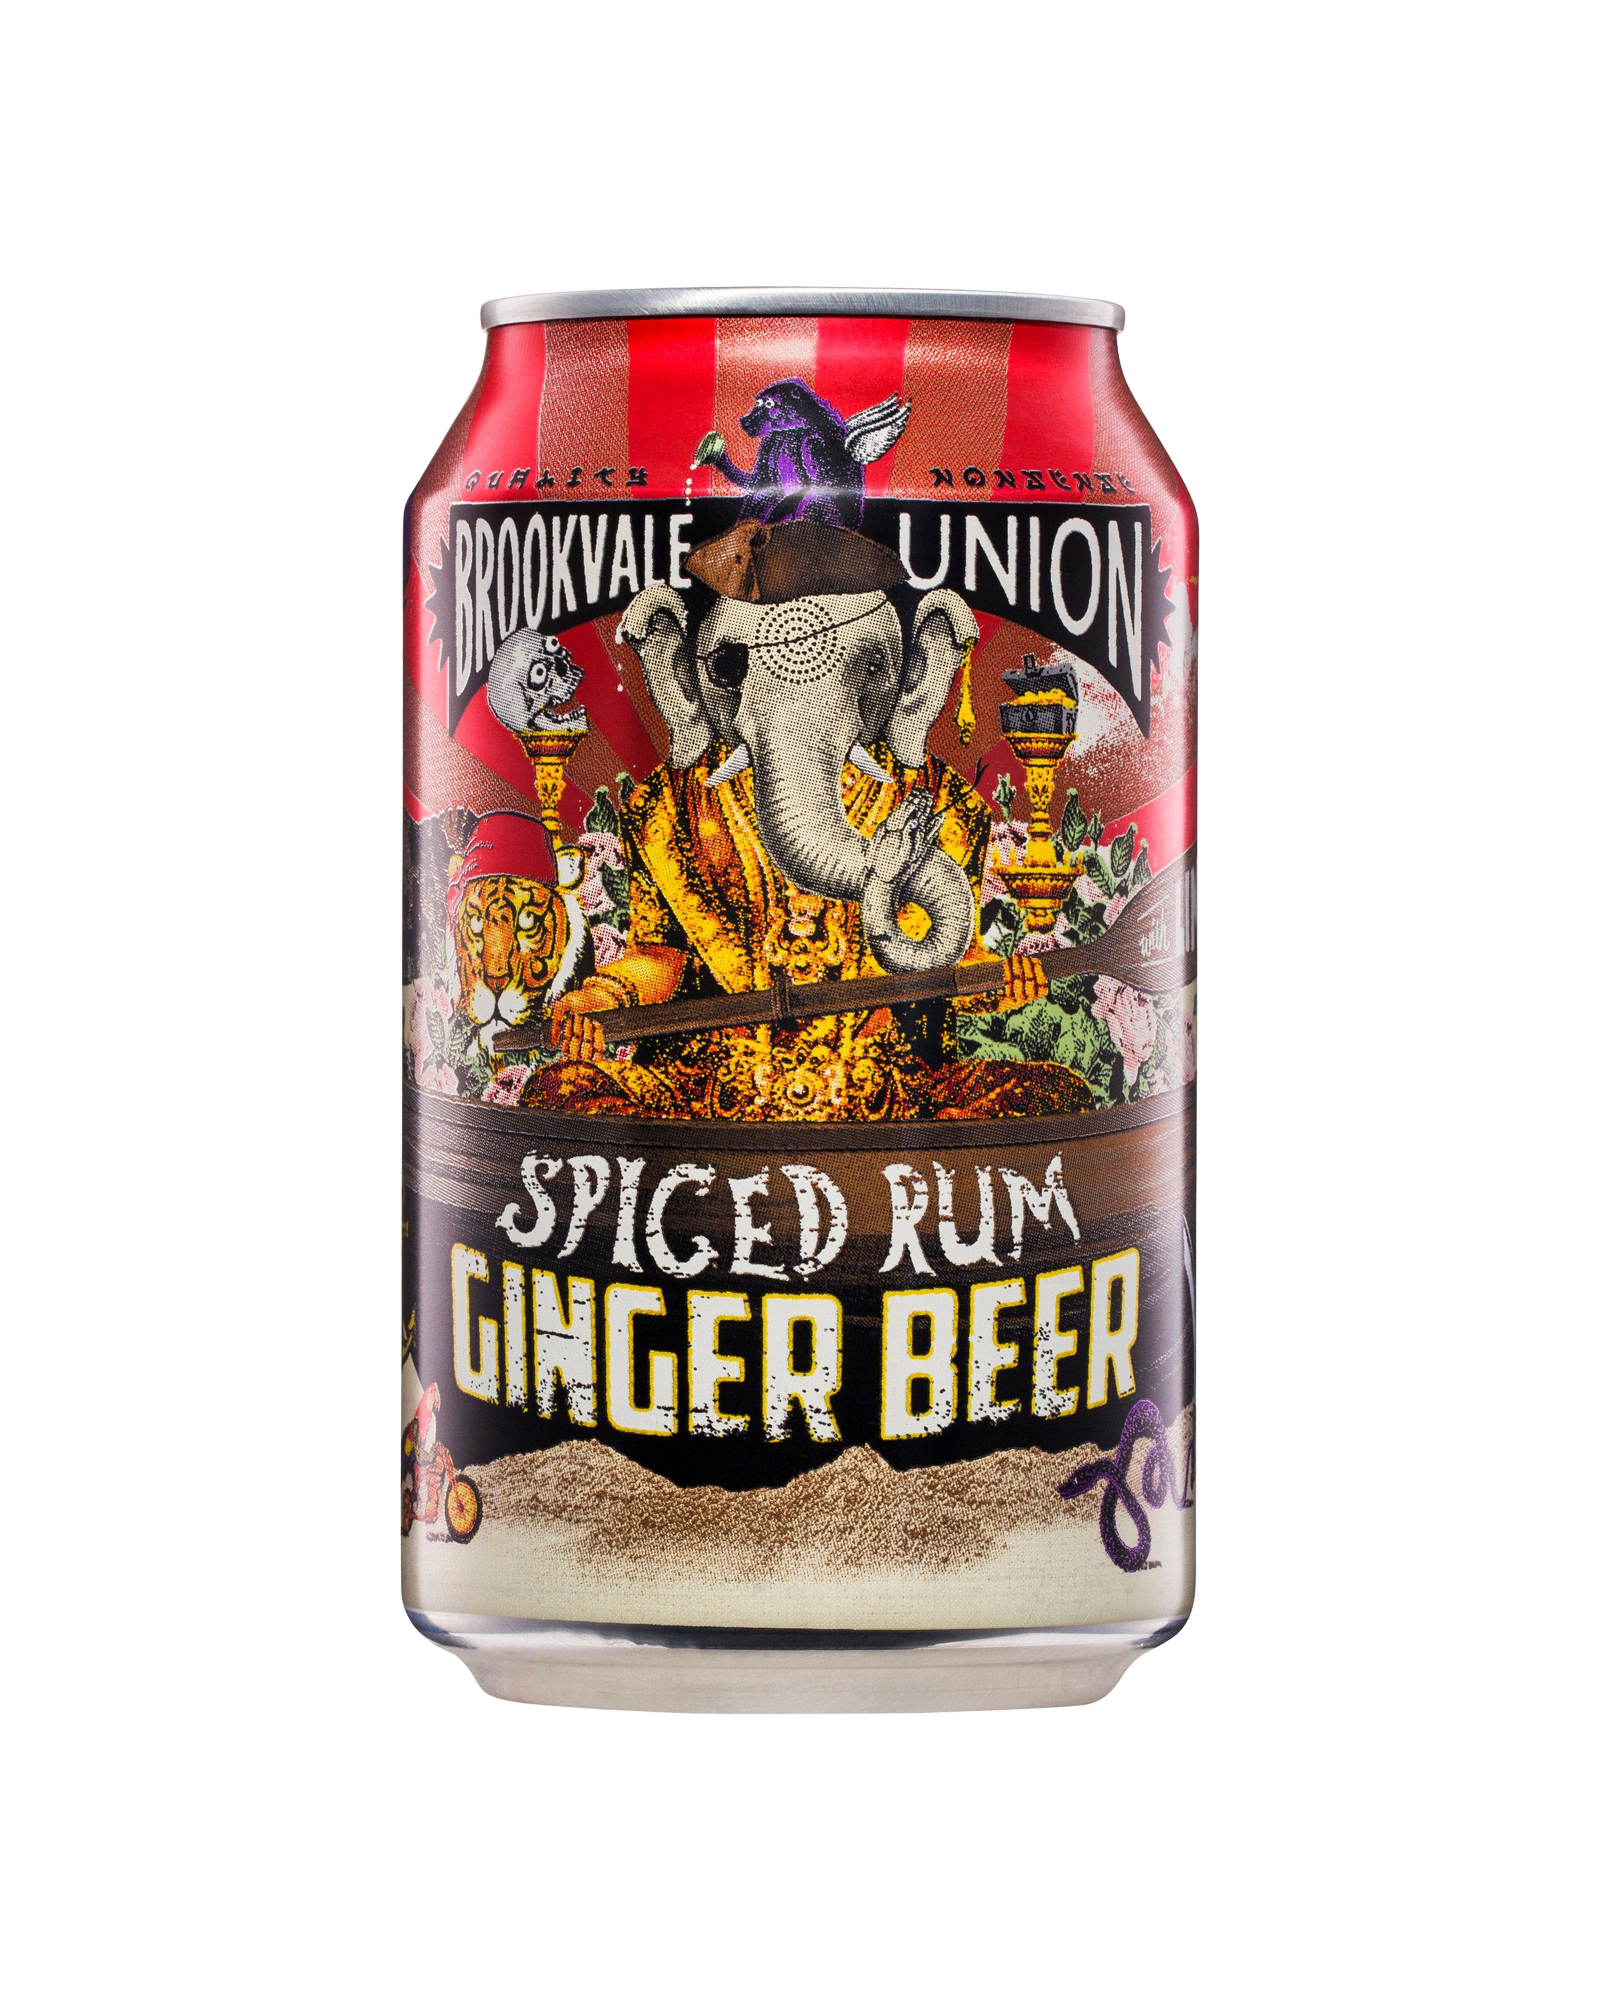 Brookvale Union Spiced Rum Ginger Beer Cans 330ml x 24